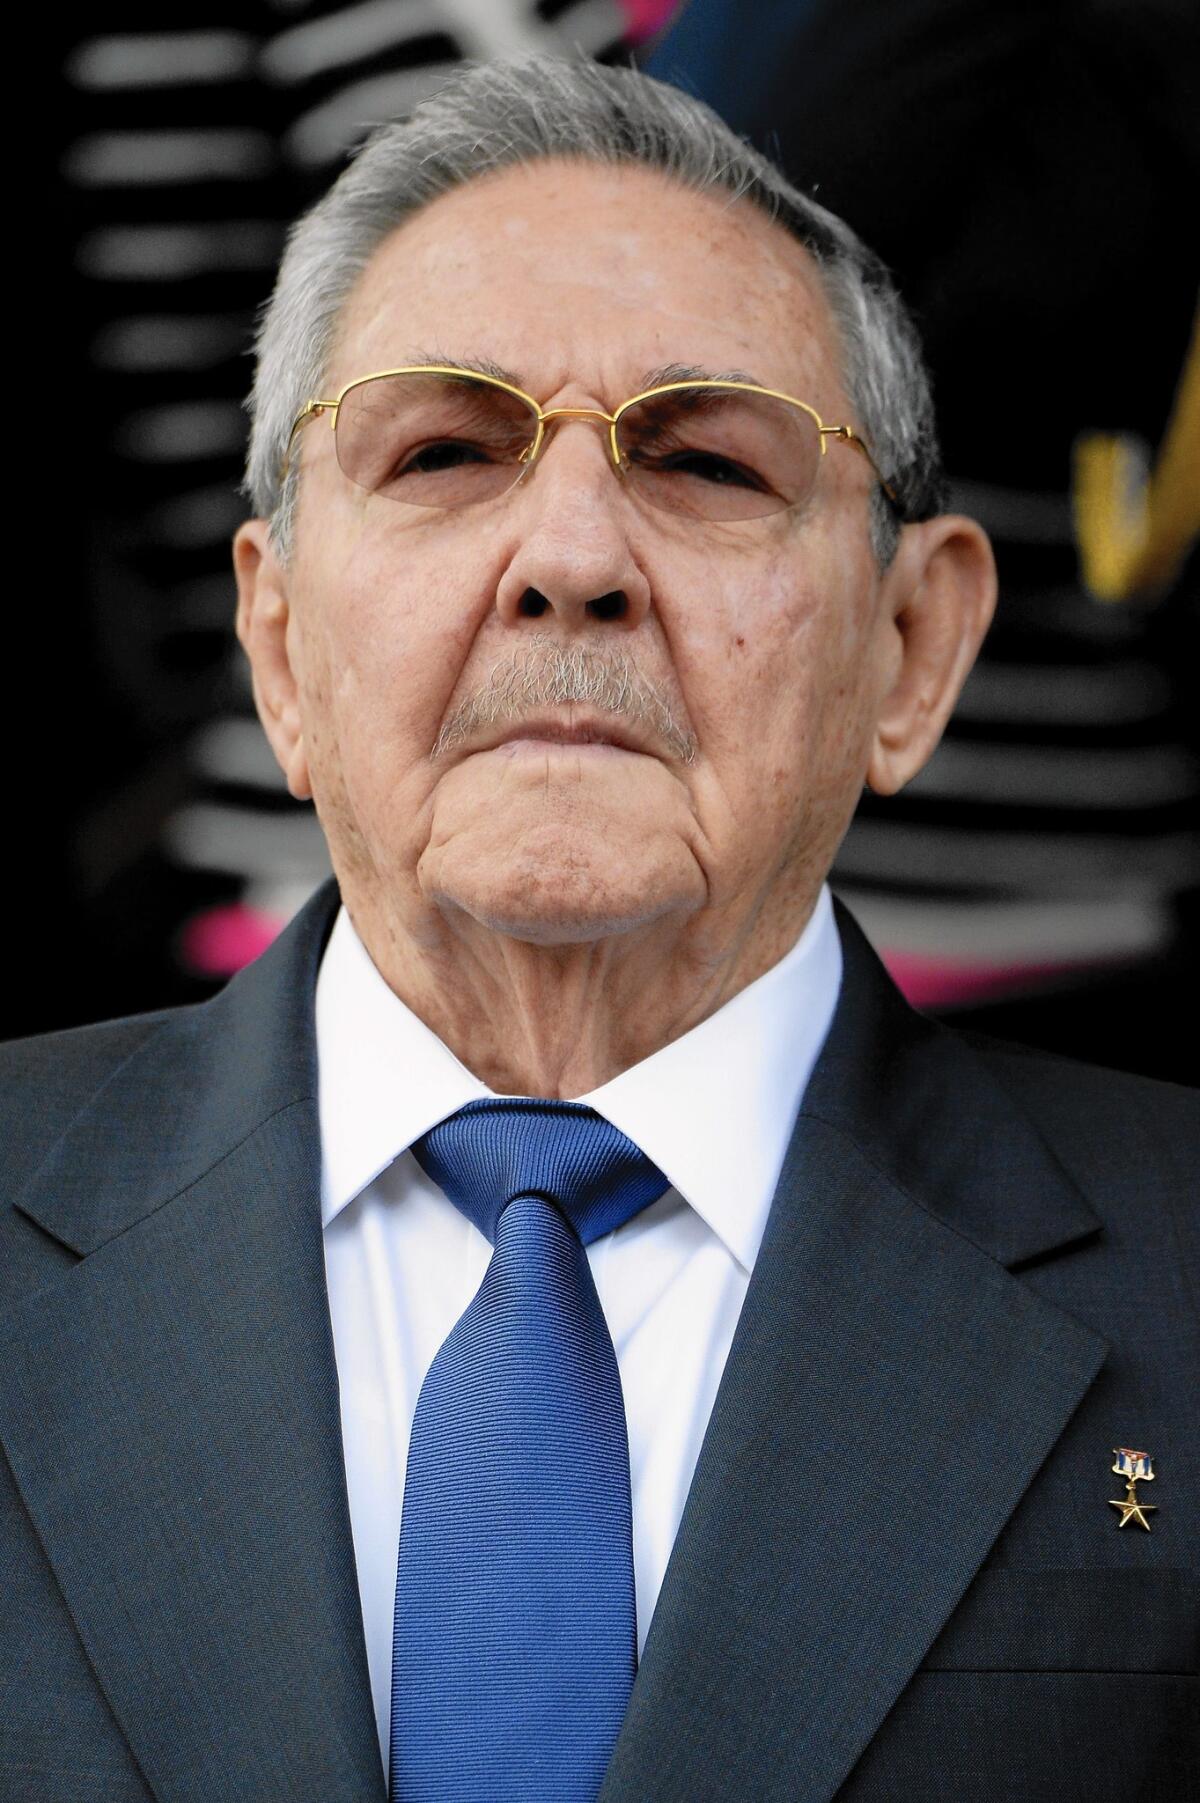 Cuban President Raul Castro will speak to the United Nations this month.